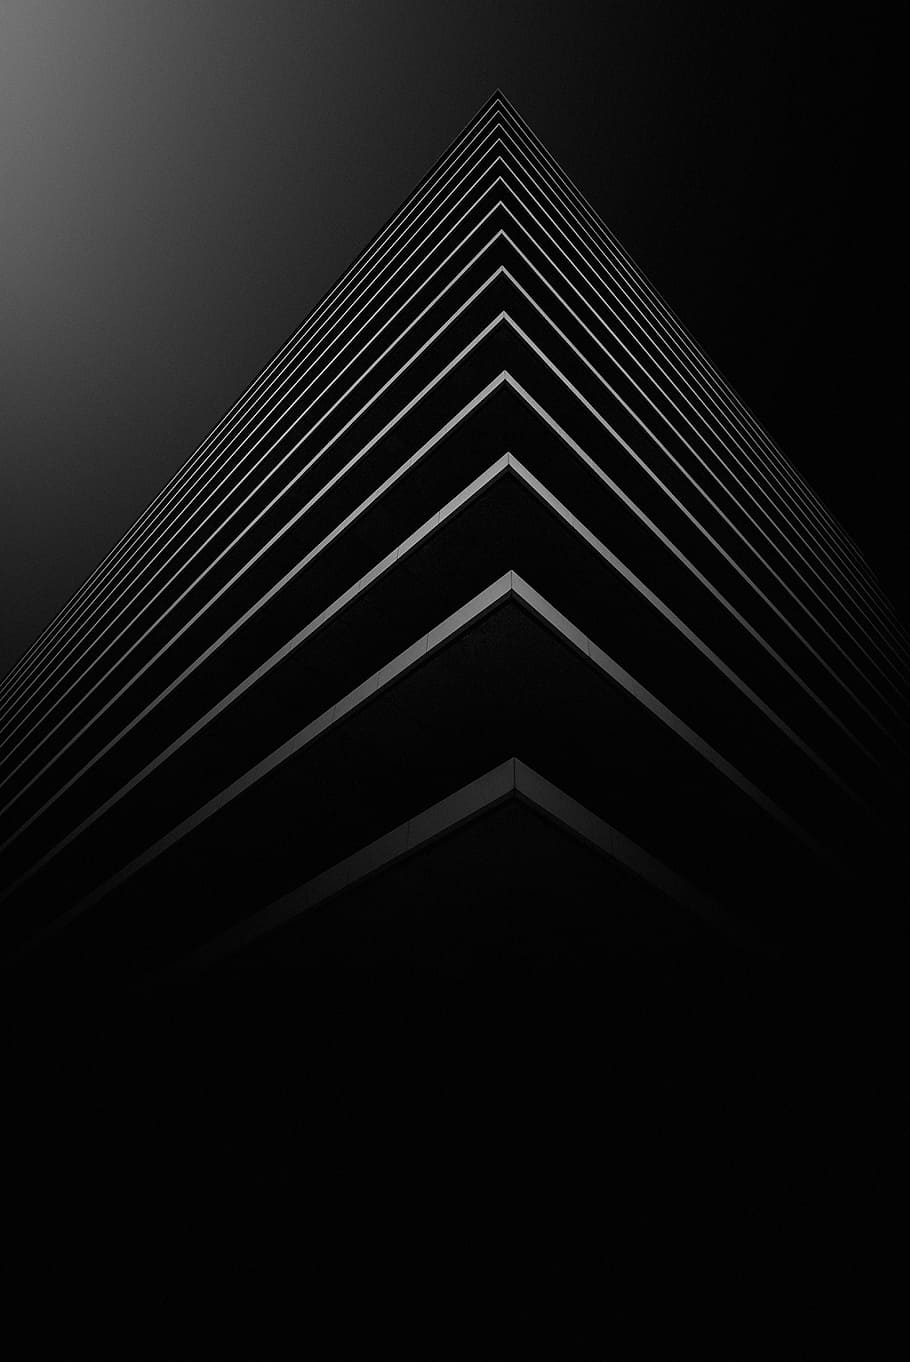 grey and black stack pyramid wallpaper, building, architecture